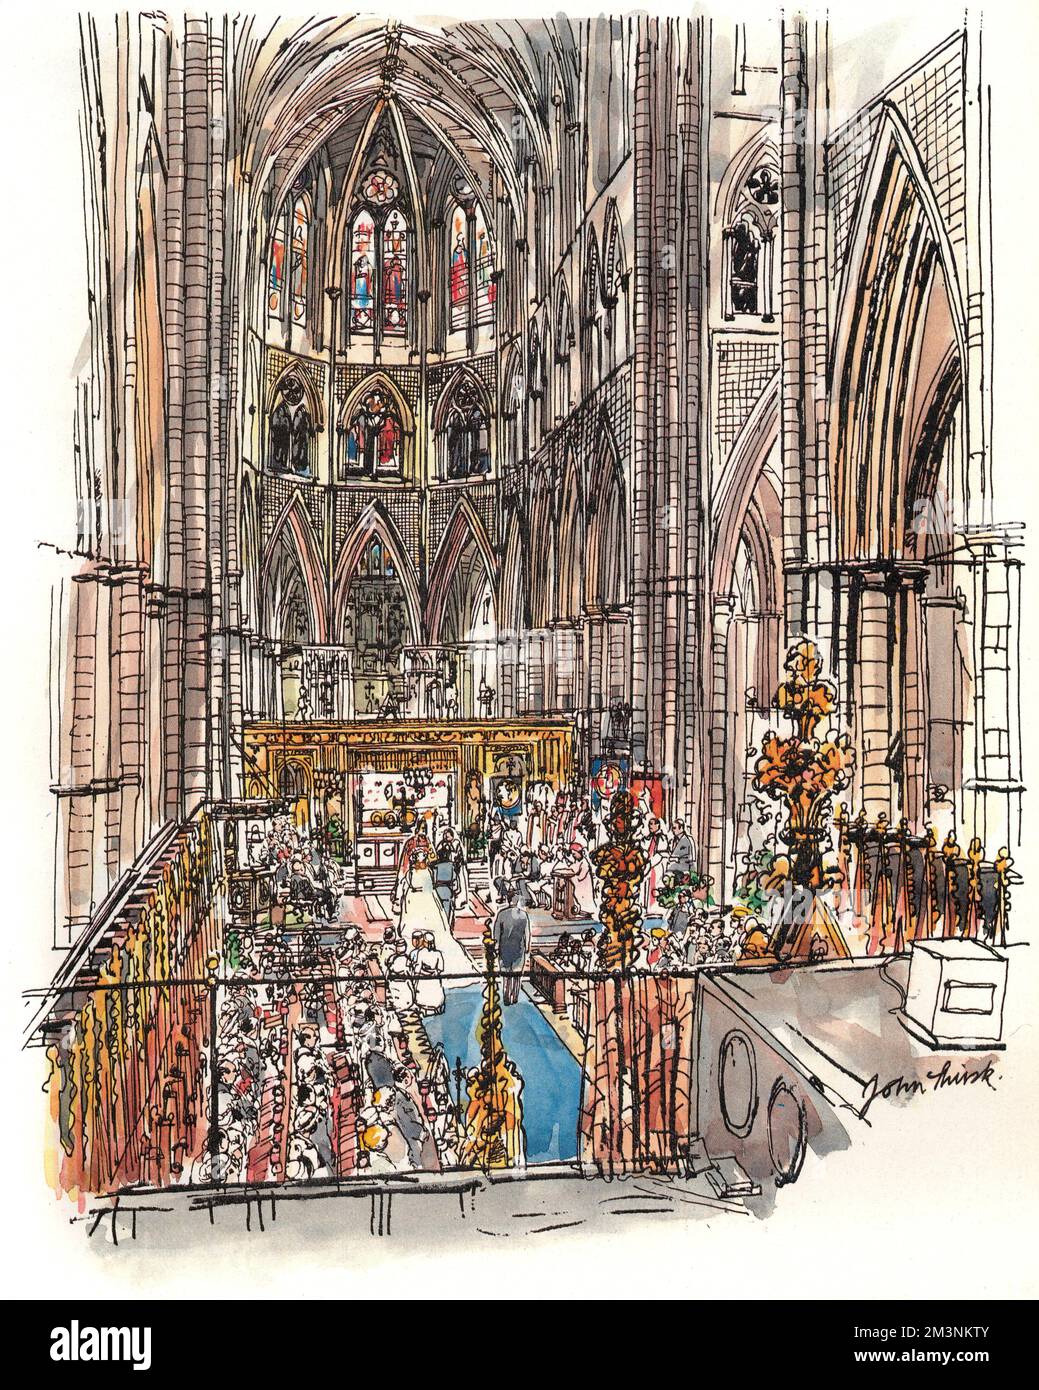 Artist's impression of the interior of Westminster Abbey, preferred venue for weddings of British royalty.     Date: 1986 Stock Photo